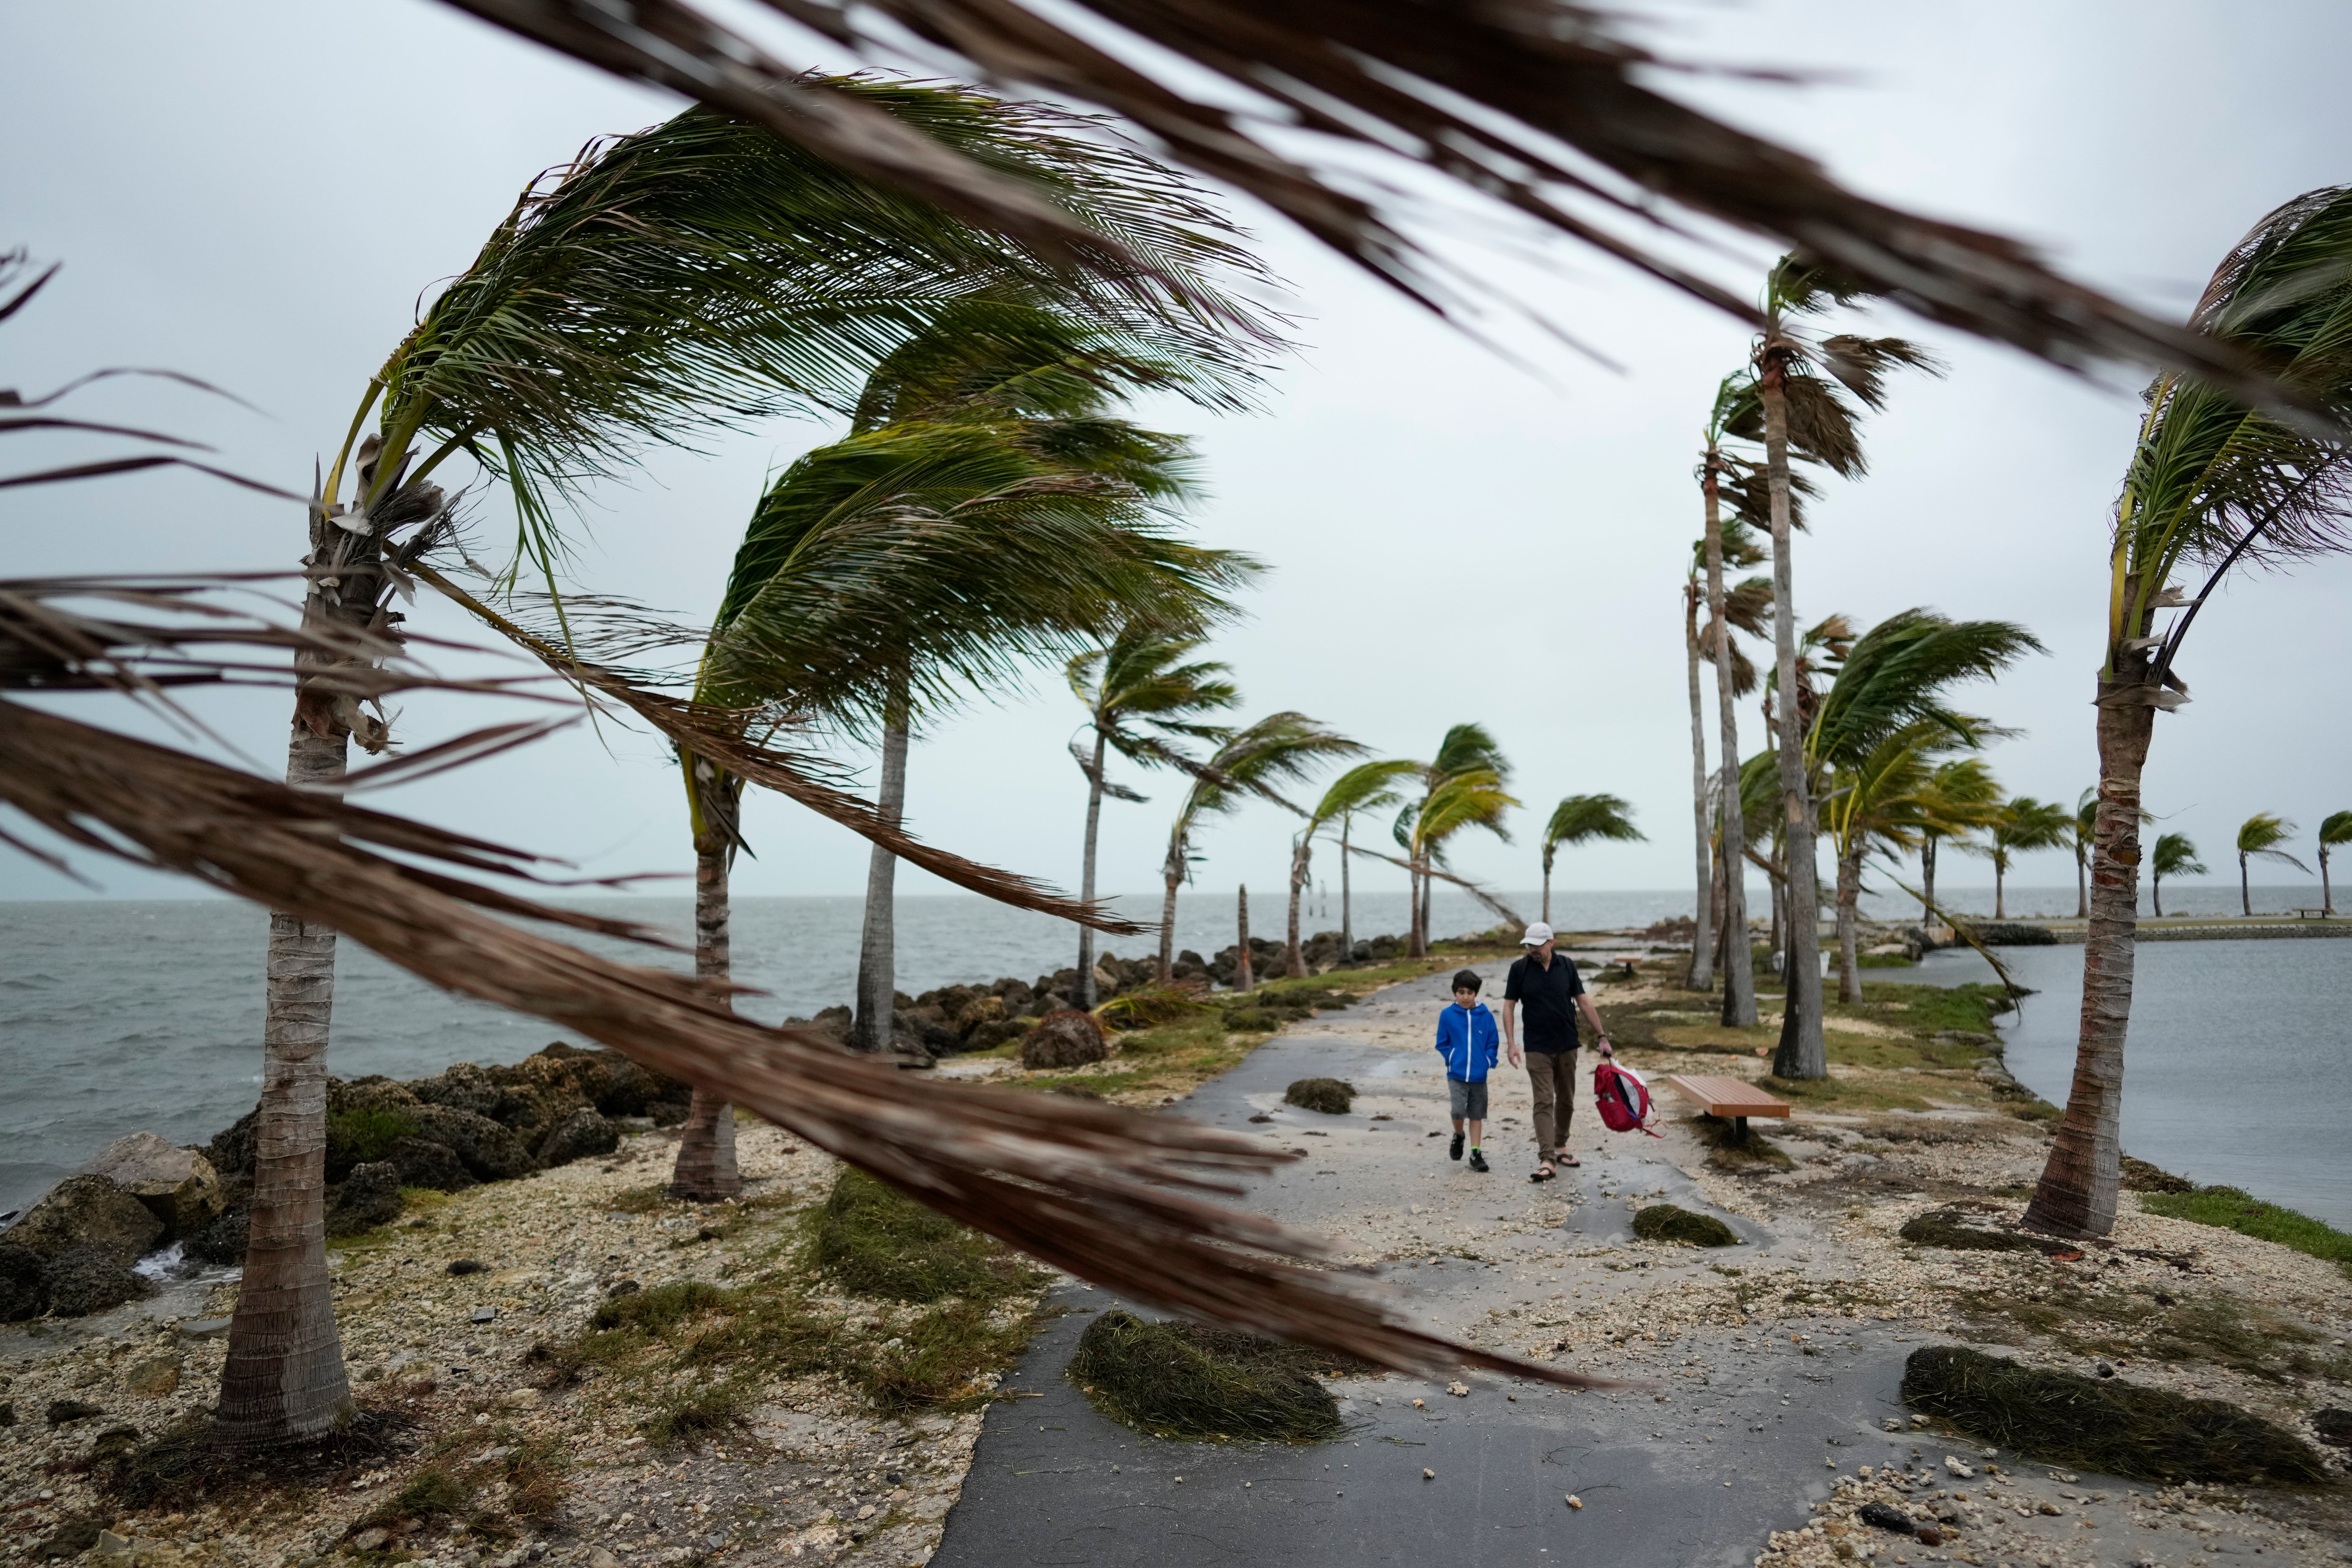 Bob Givehchi, right, and his son Daniel, 8, Toronto residents visiting Miami for the first time, walk past debris and palm trees blowing in gusty winds, at Matheson Hammock Park in Coral Gables